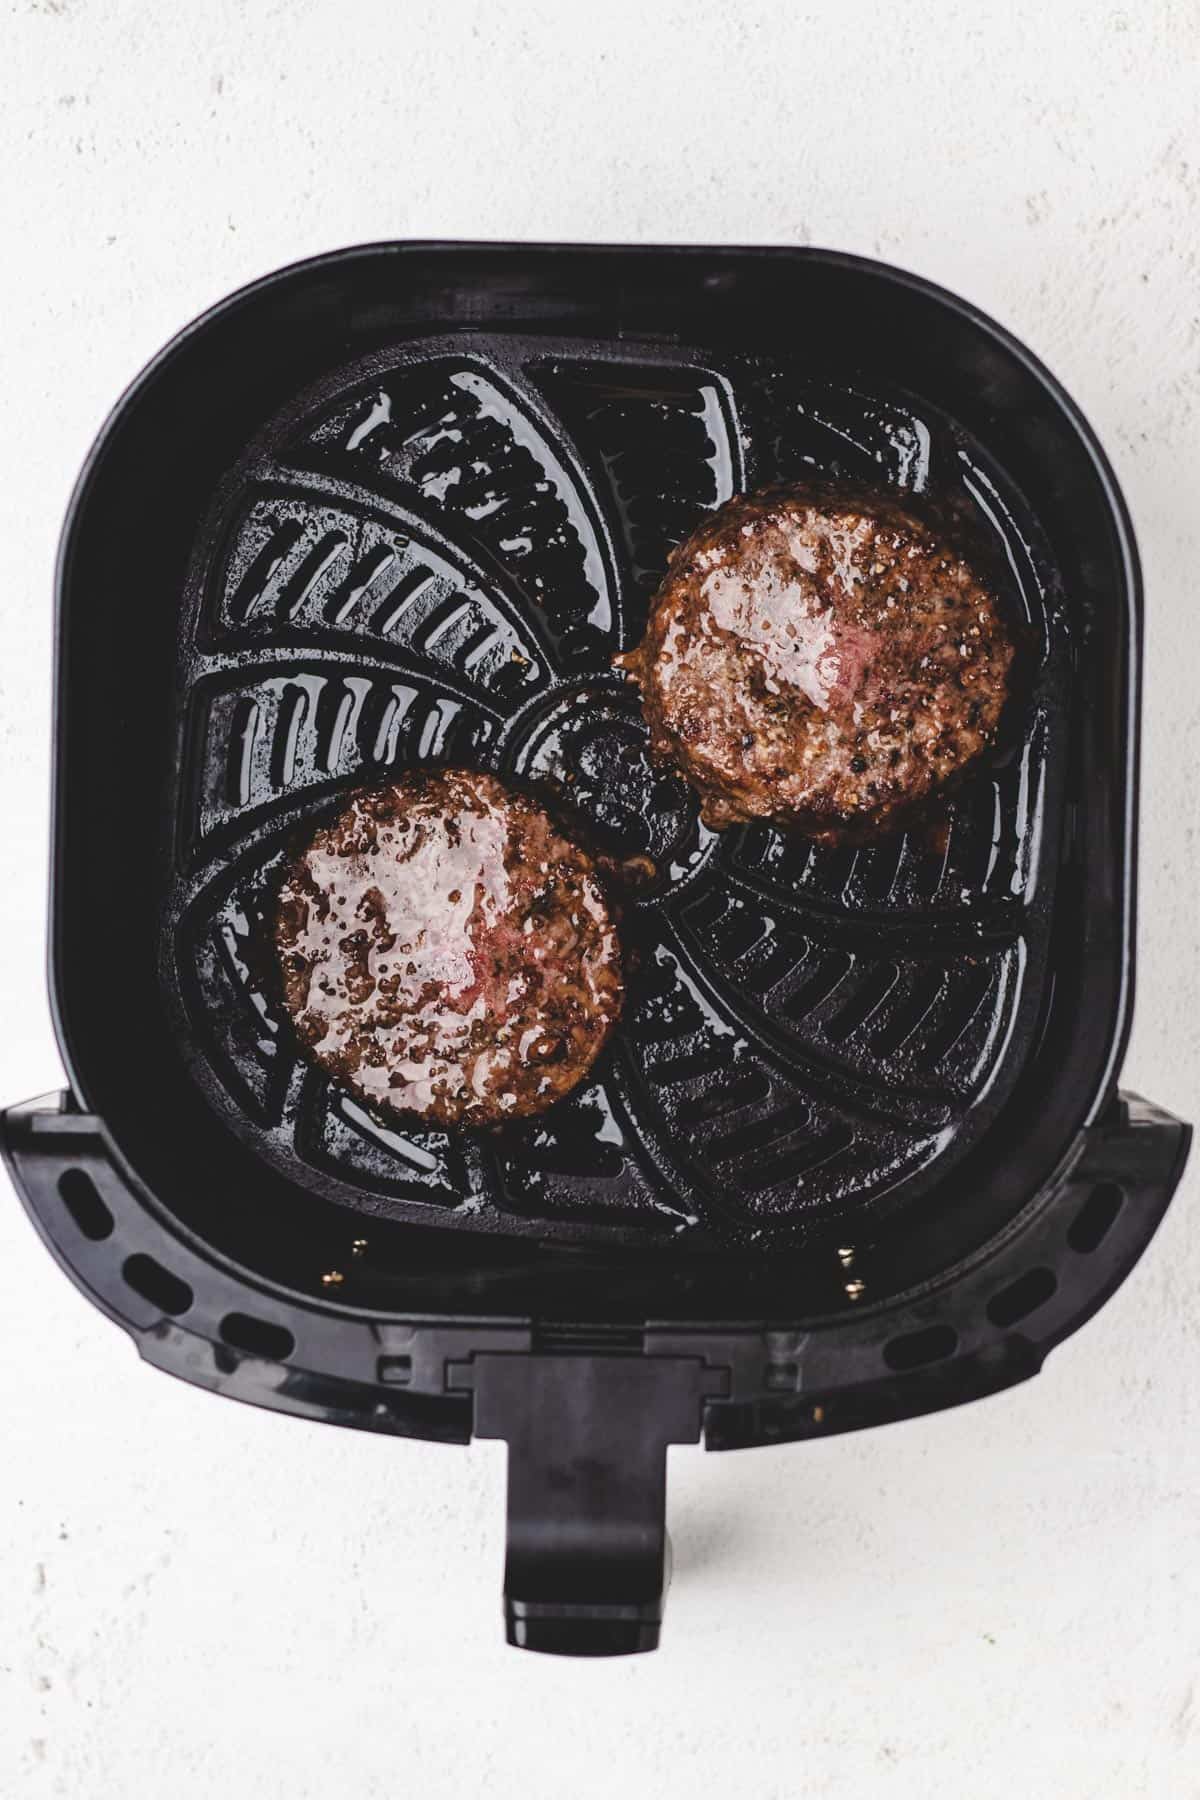 Cooked burgers in an air fryer basket.